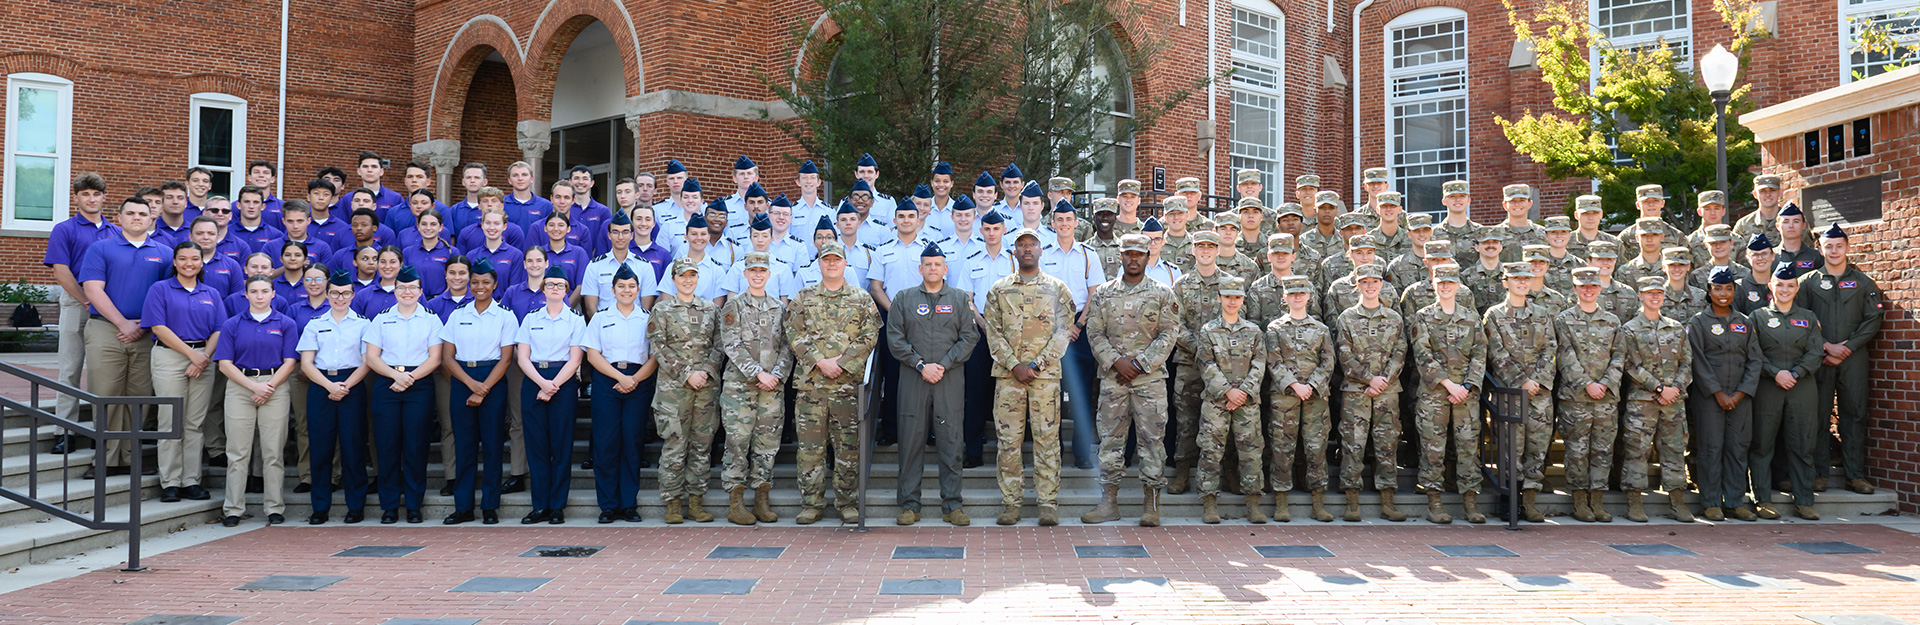 Group photo of male and female students in Air Force camouflage and uniforms standing in front of Tillman Hall.